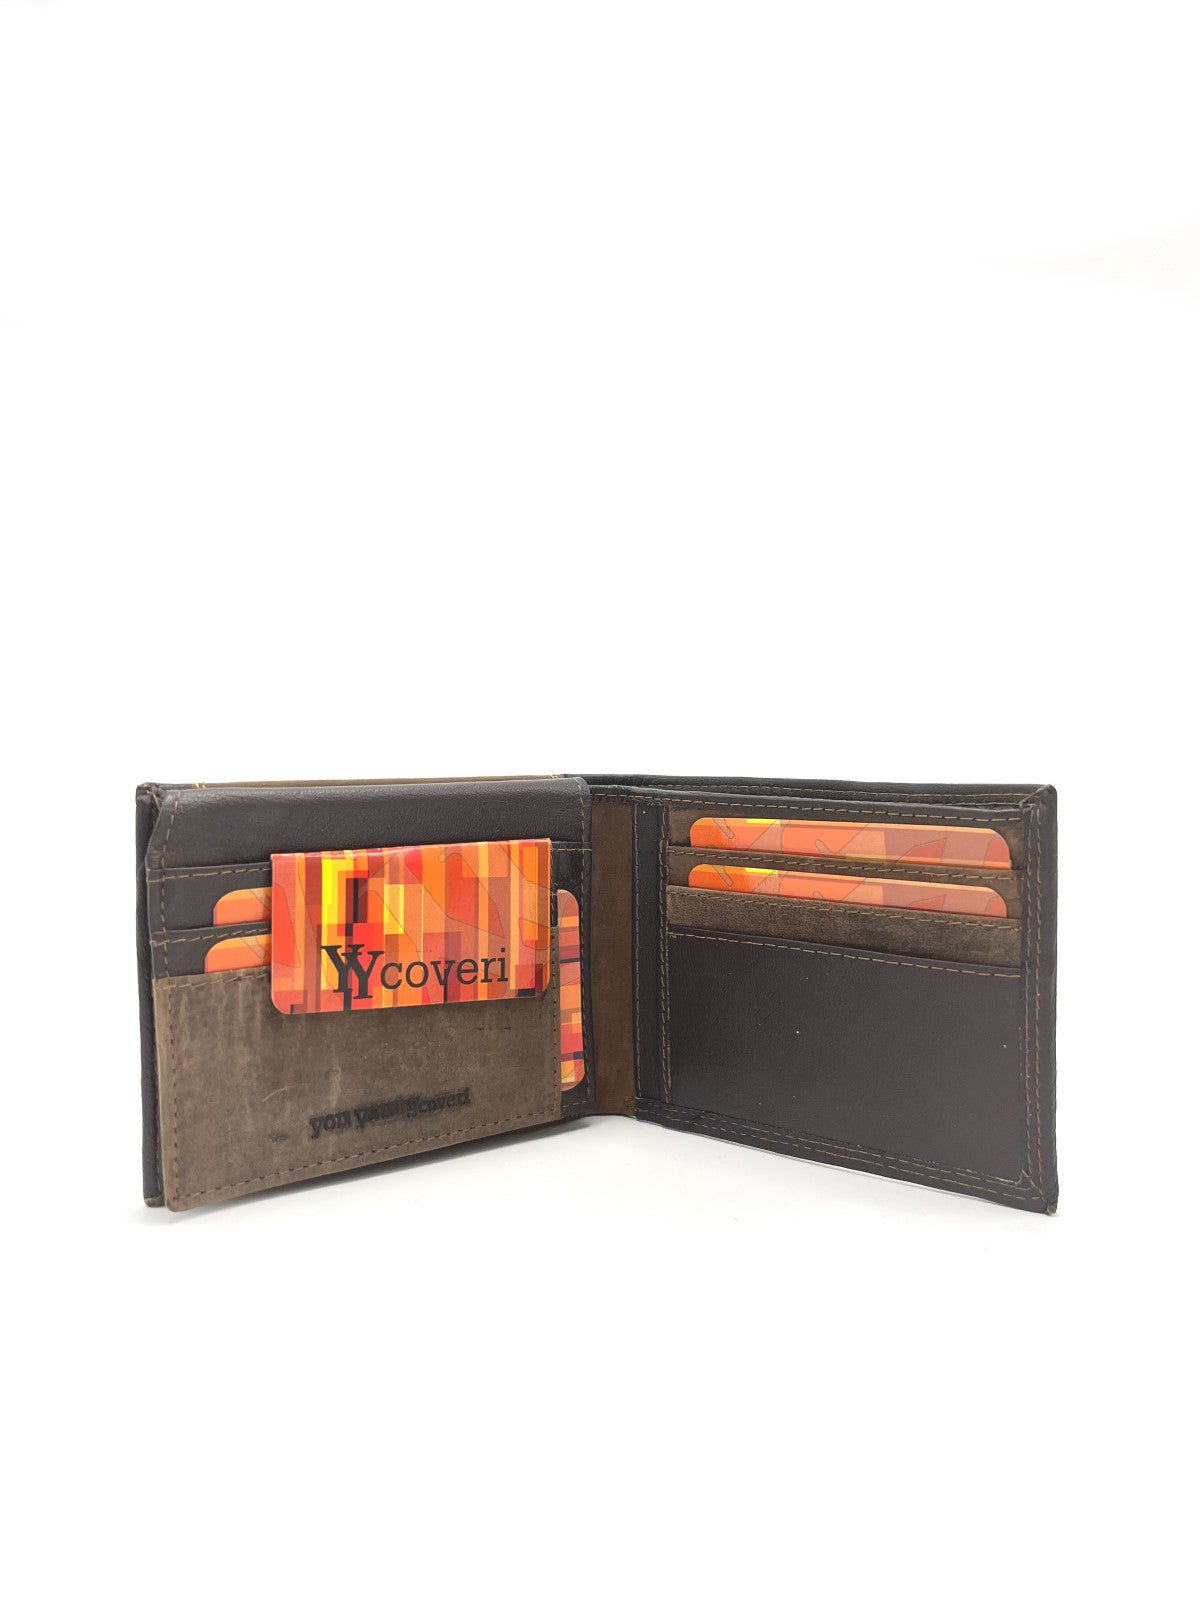 Genuine leather wallet for men, Brand You Young Coveri, art. NEPI1161.422